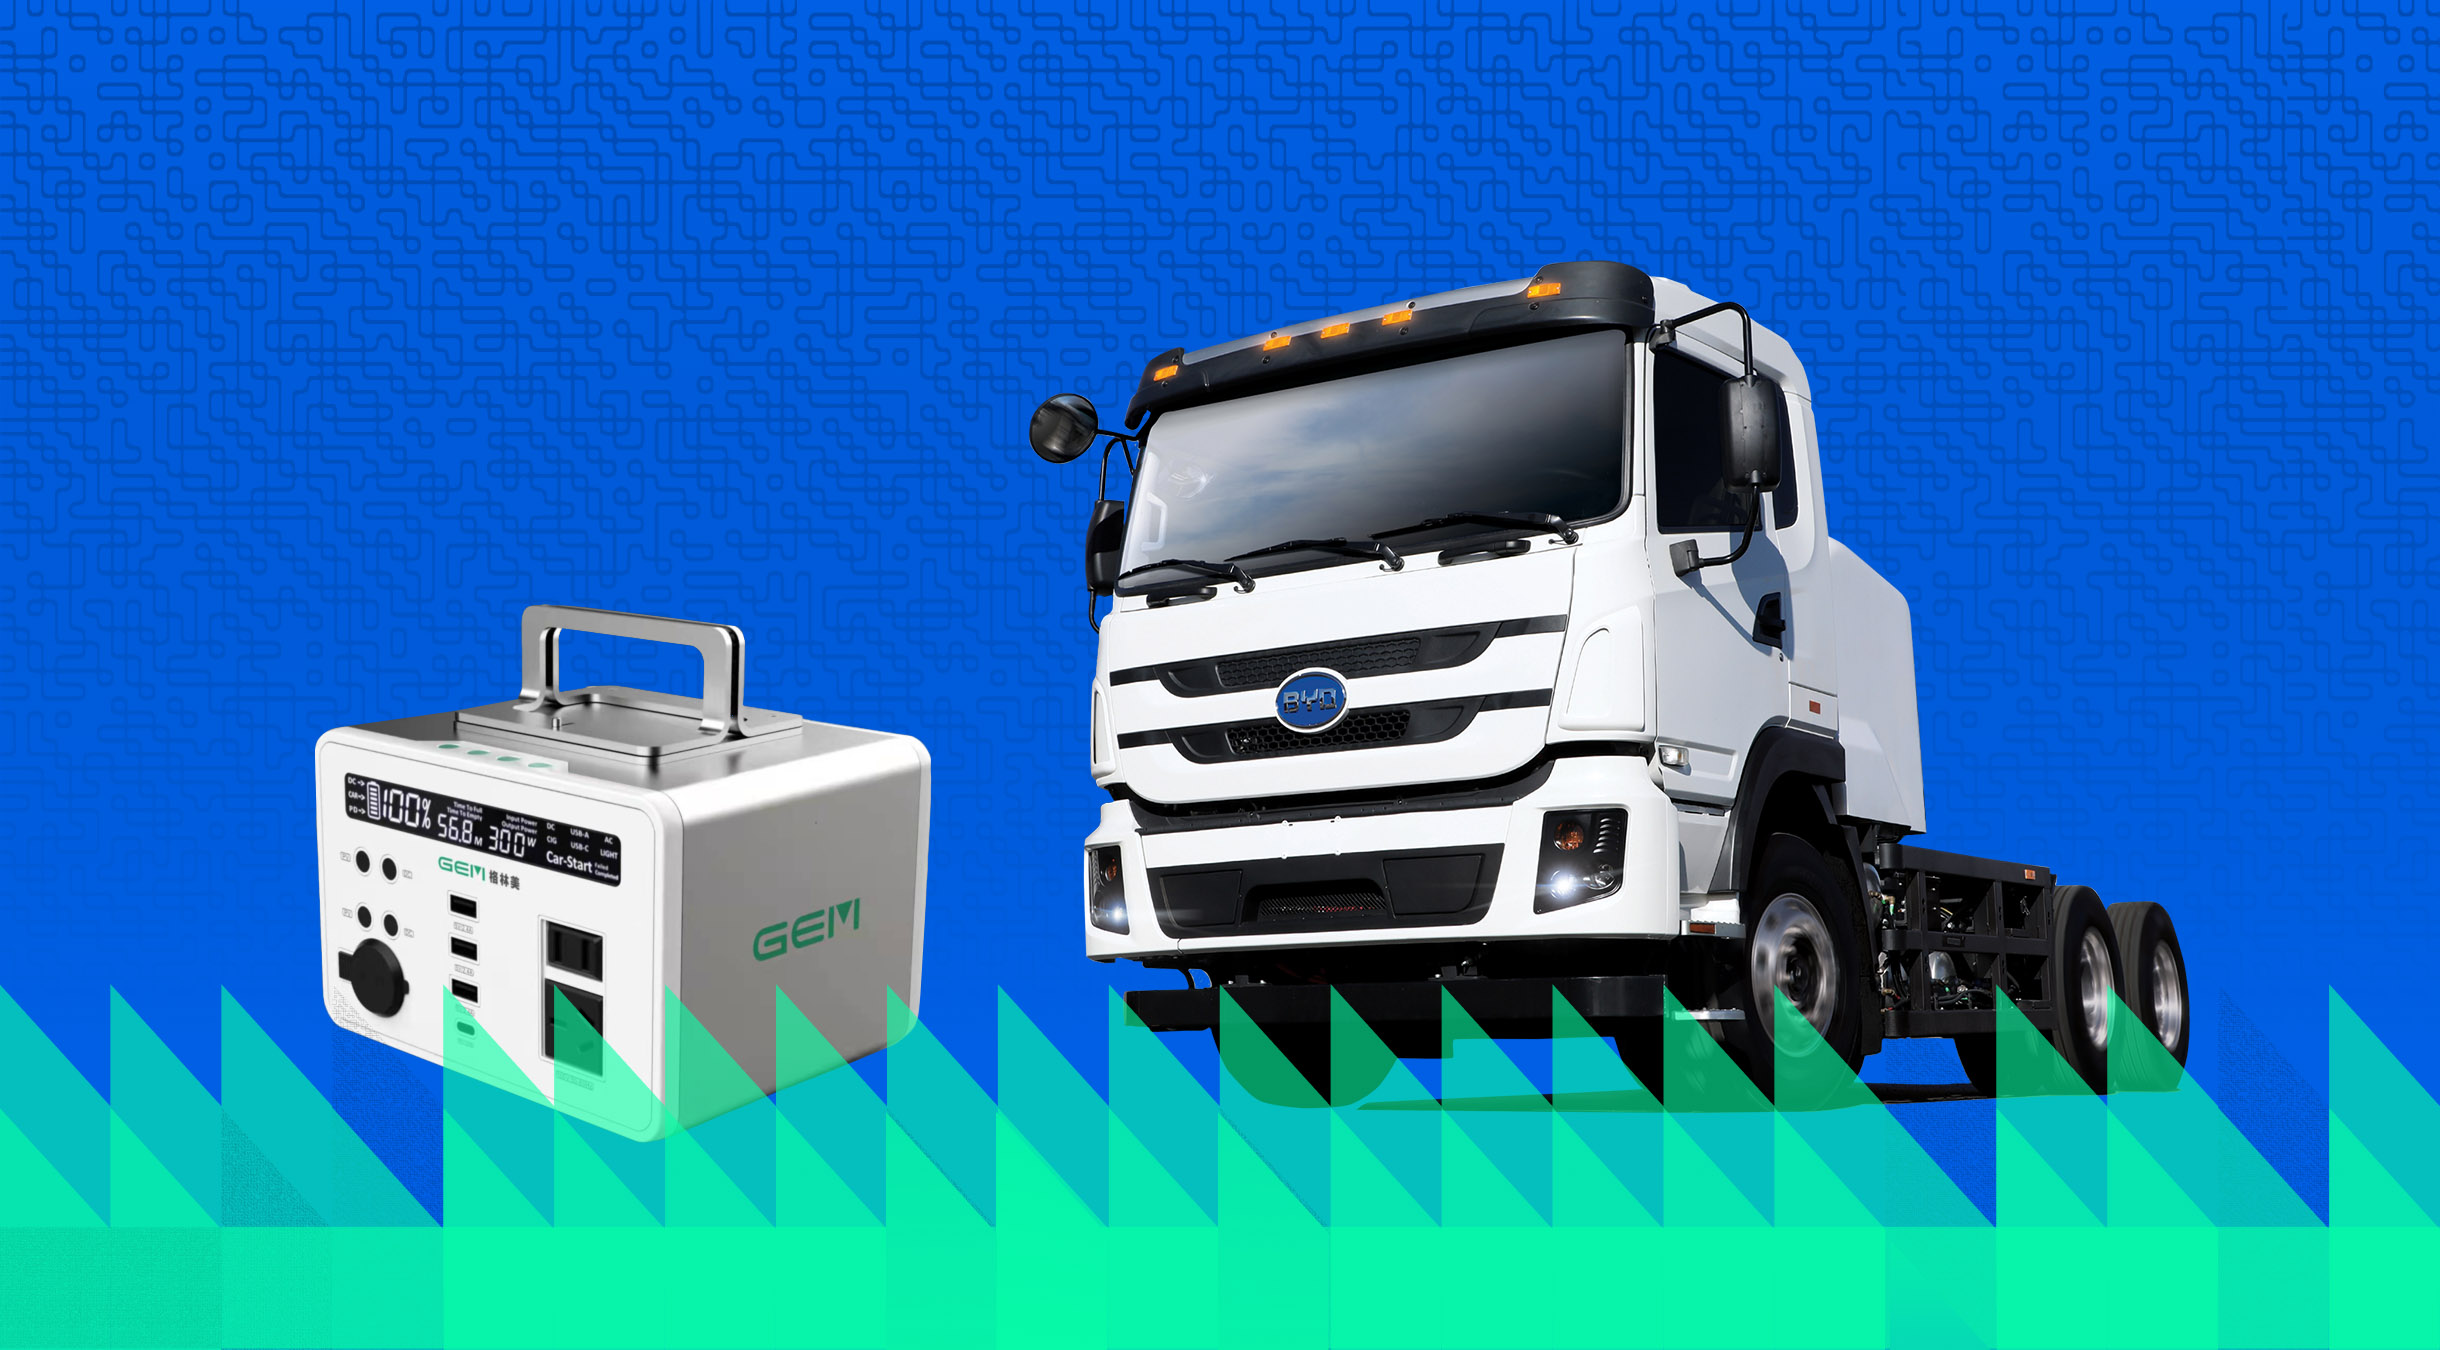 a GEM battery and a BYD commercial electric truck